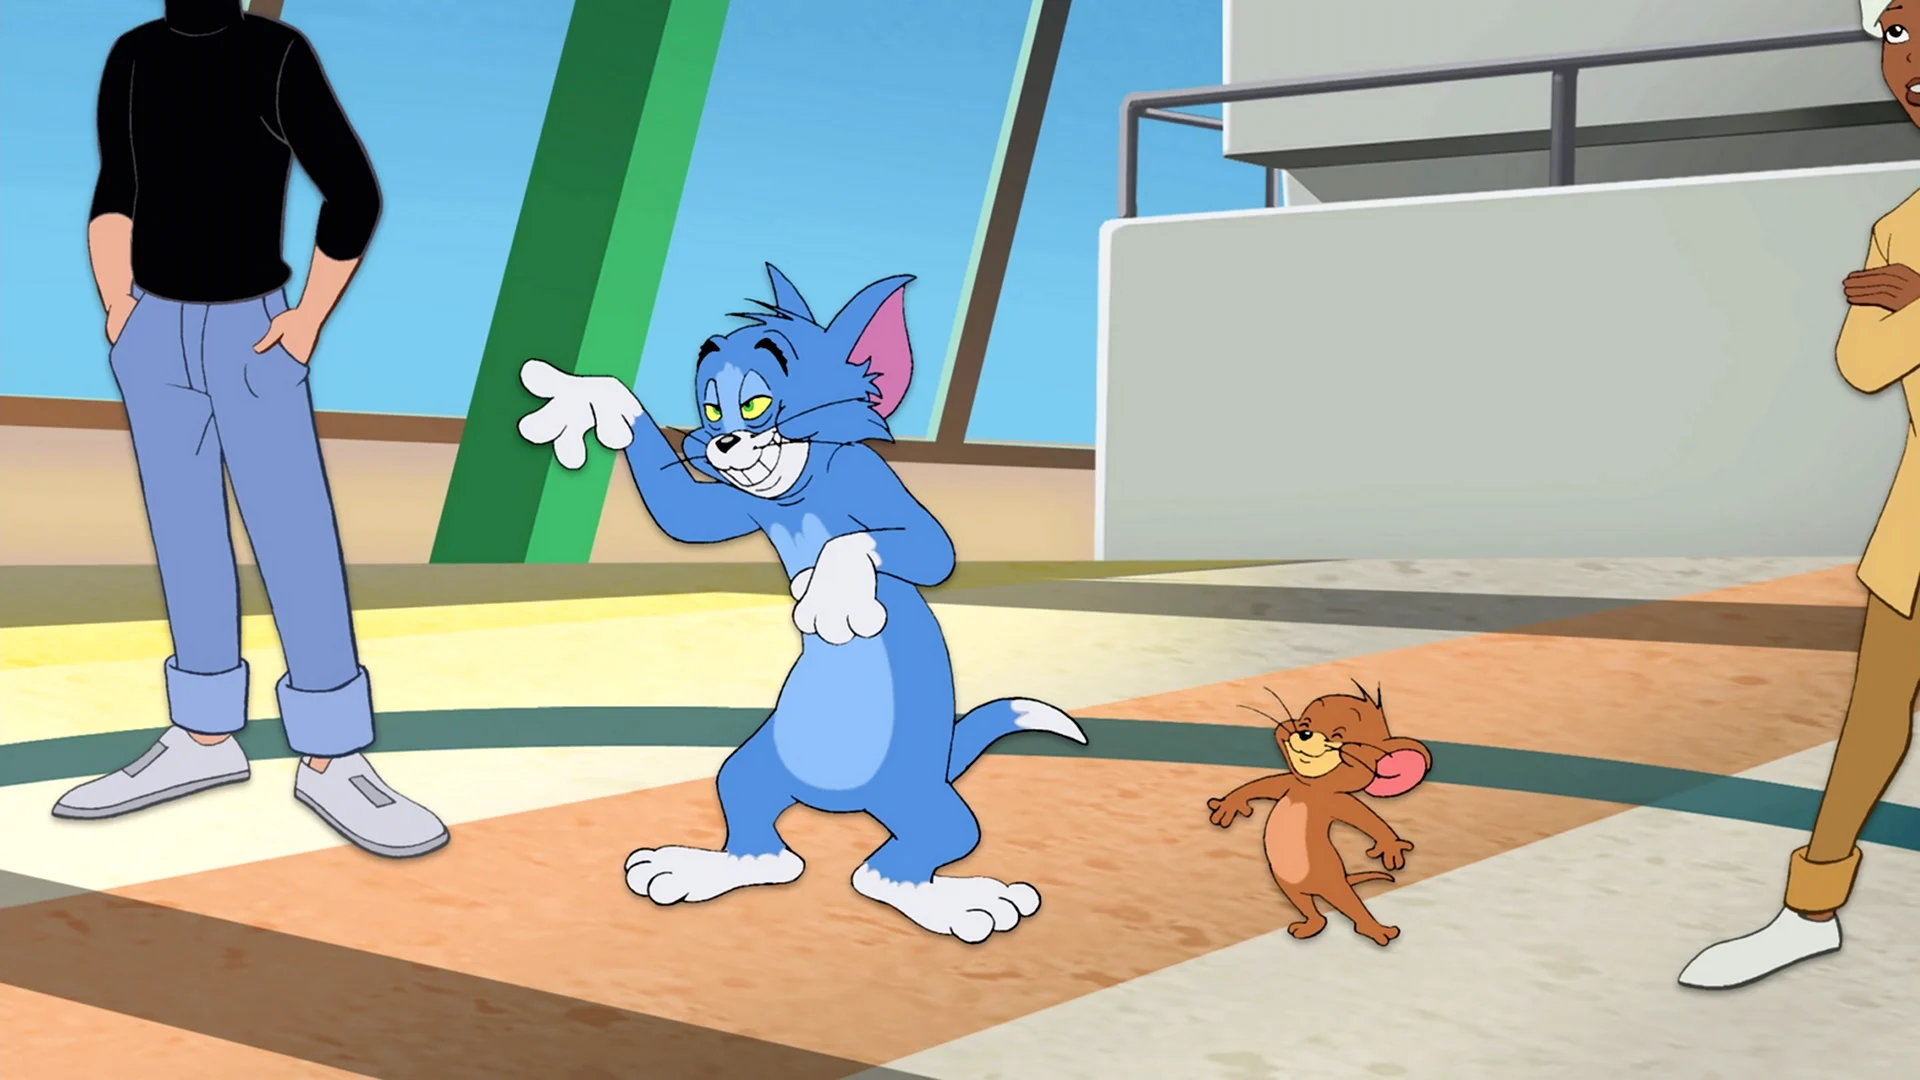 Tom and Jerry Spy Quest 2015